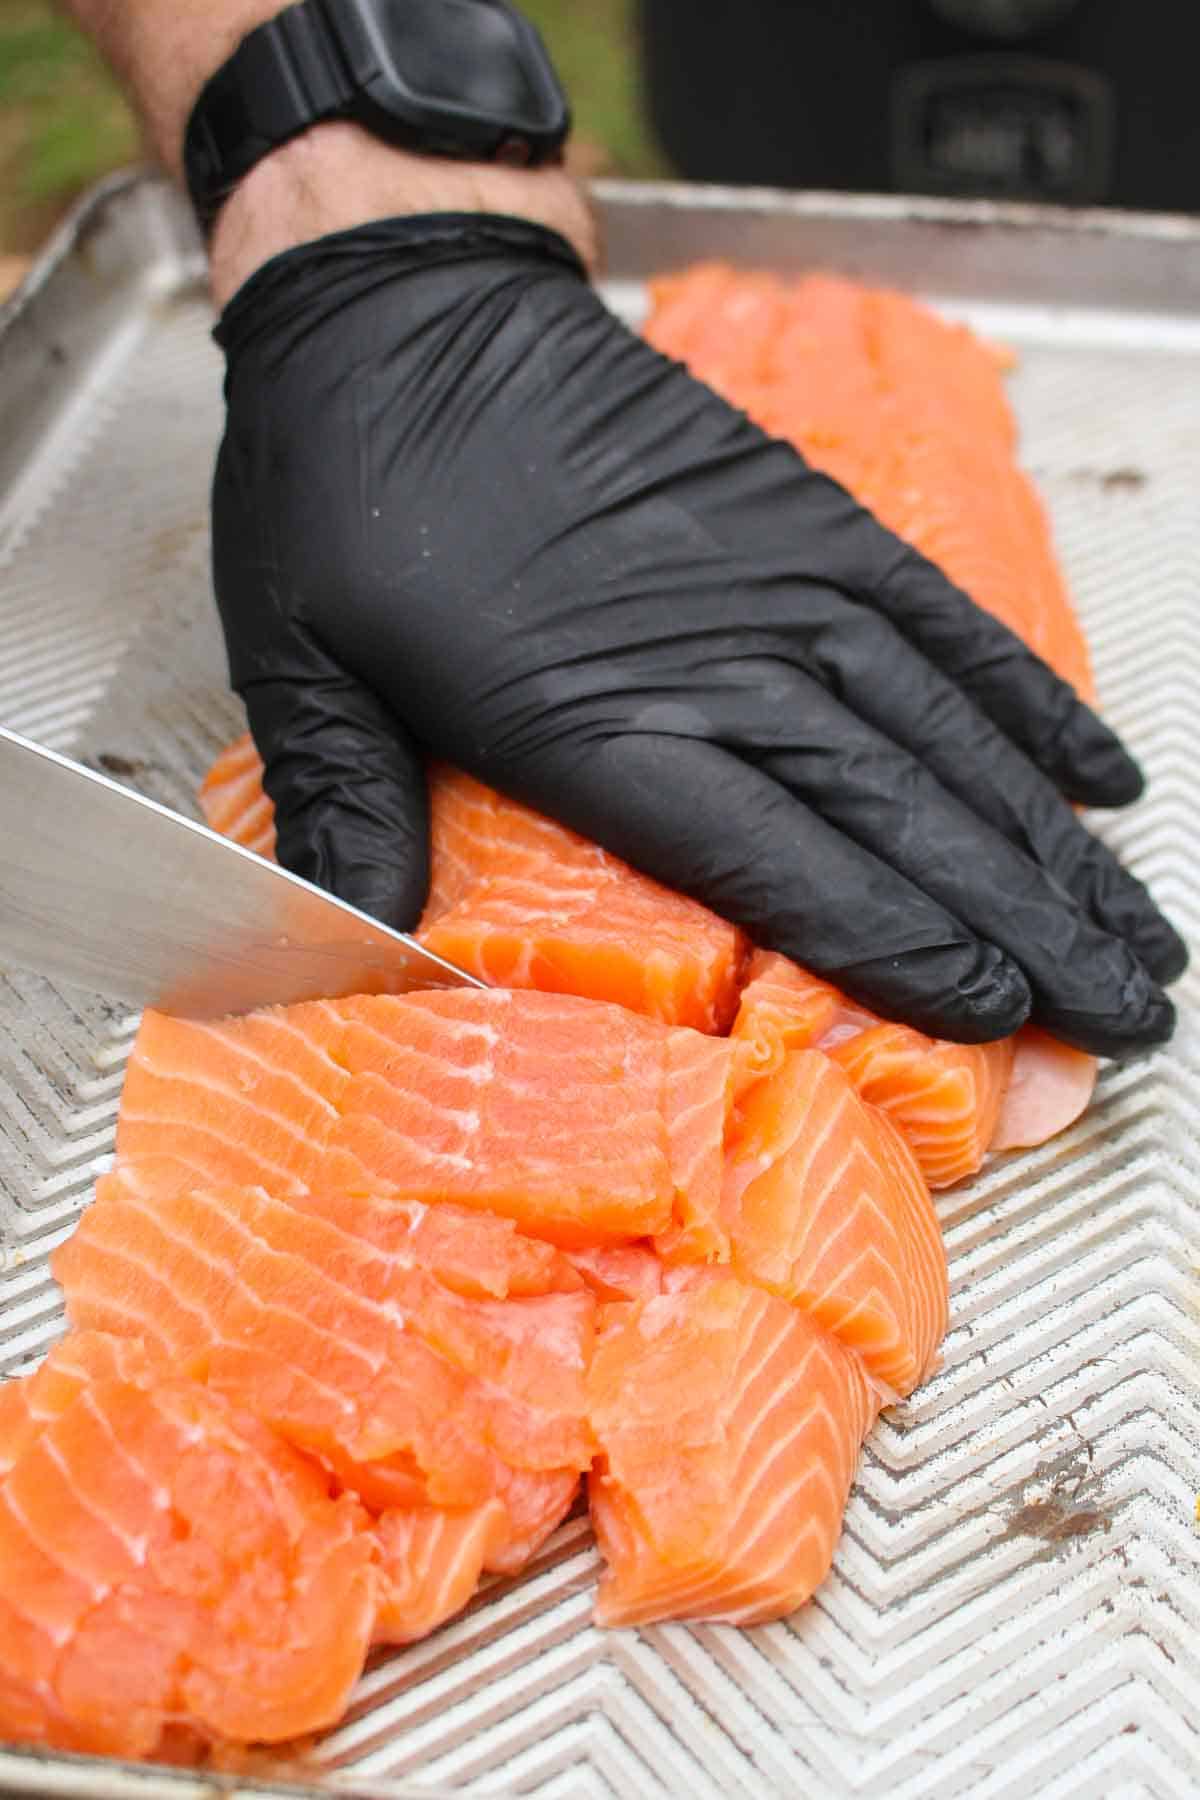 Cutting the salmon filet into bite size pieces.